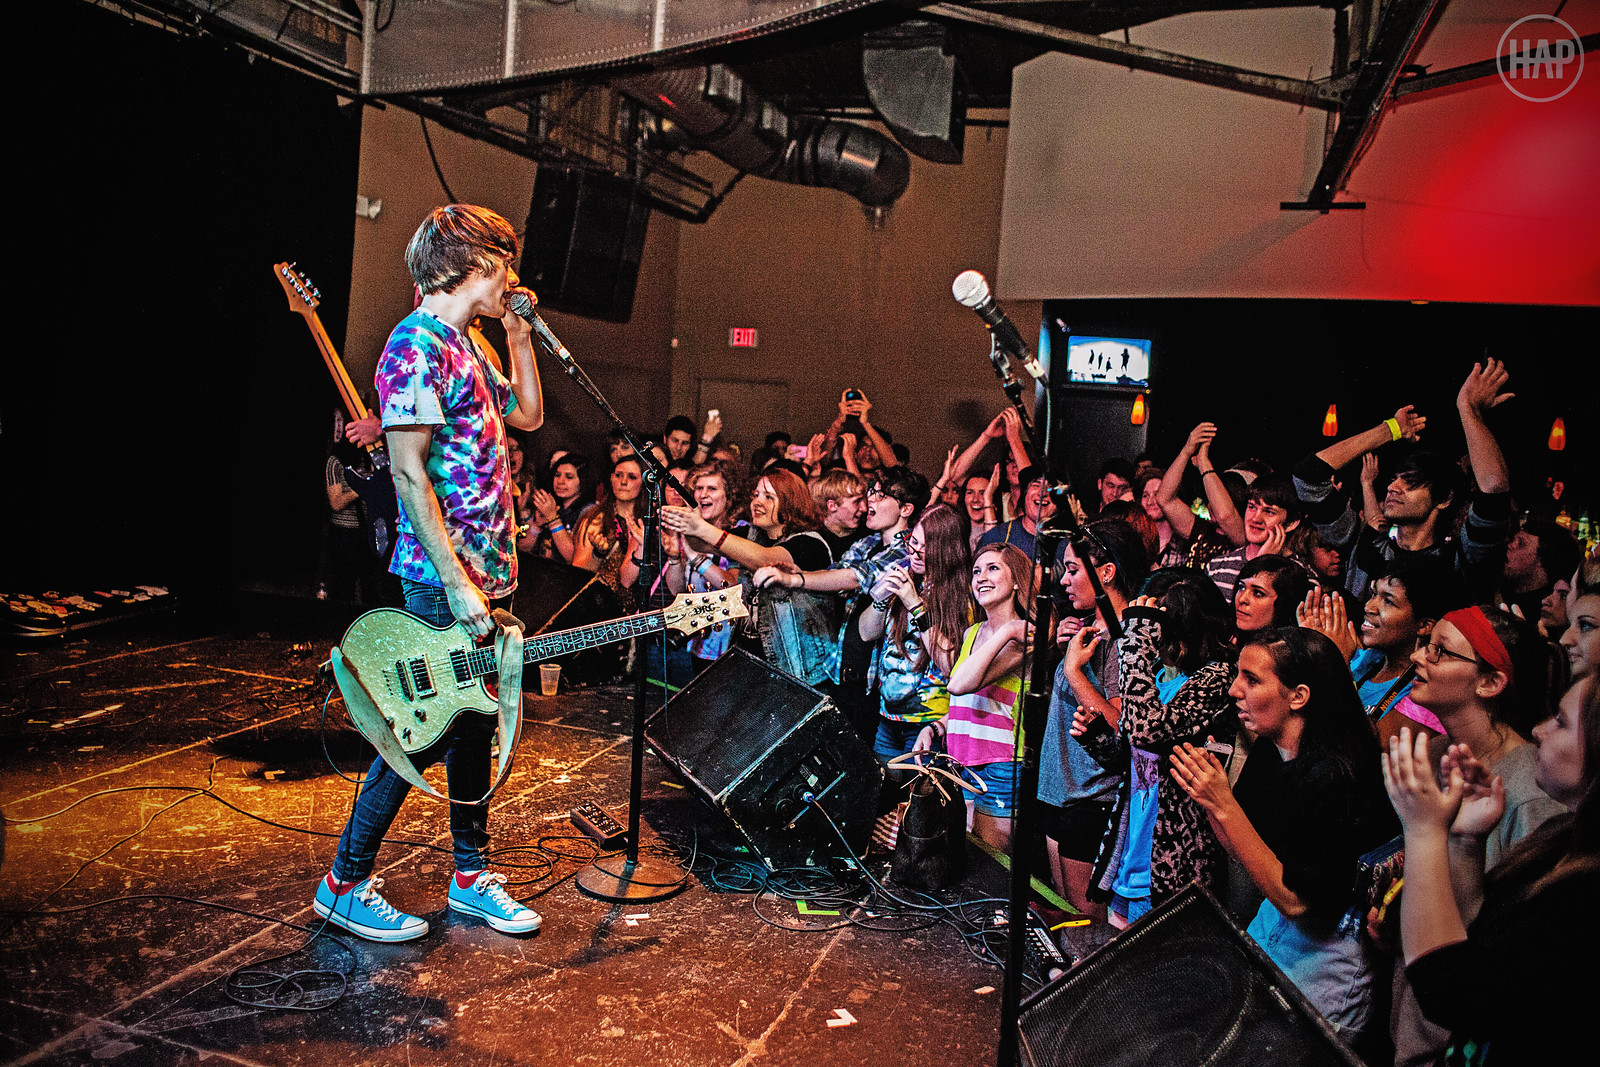 4-5-14 Awsten at Warehouse Live by Heather Ann Phillips on Flickr